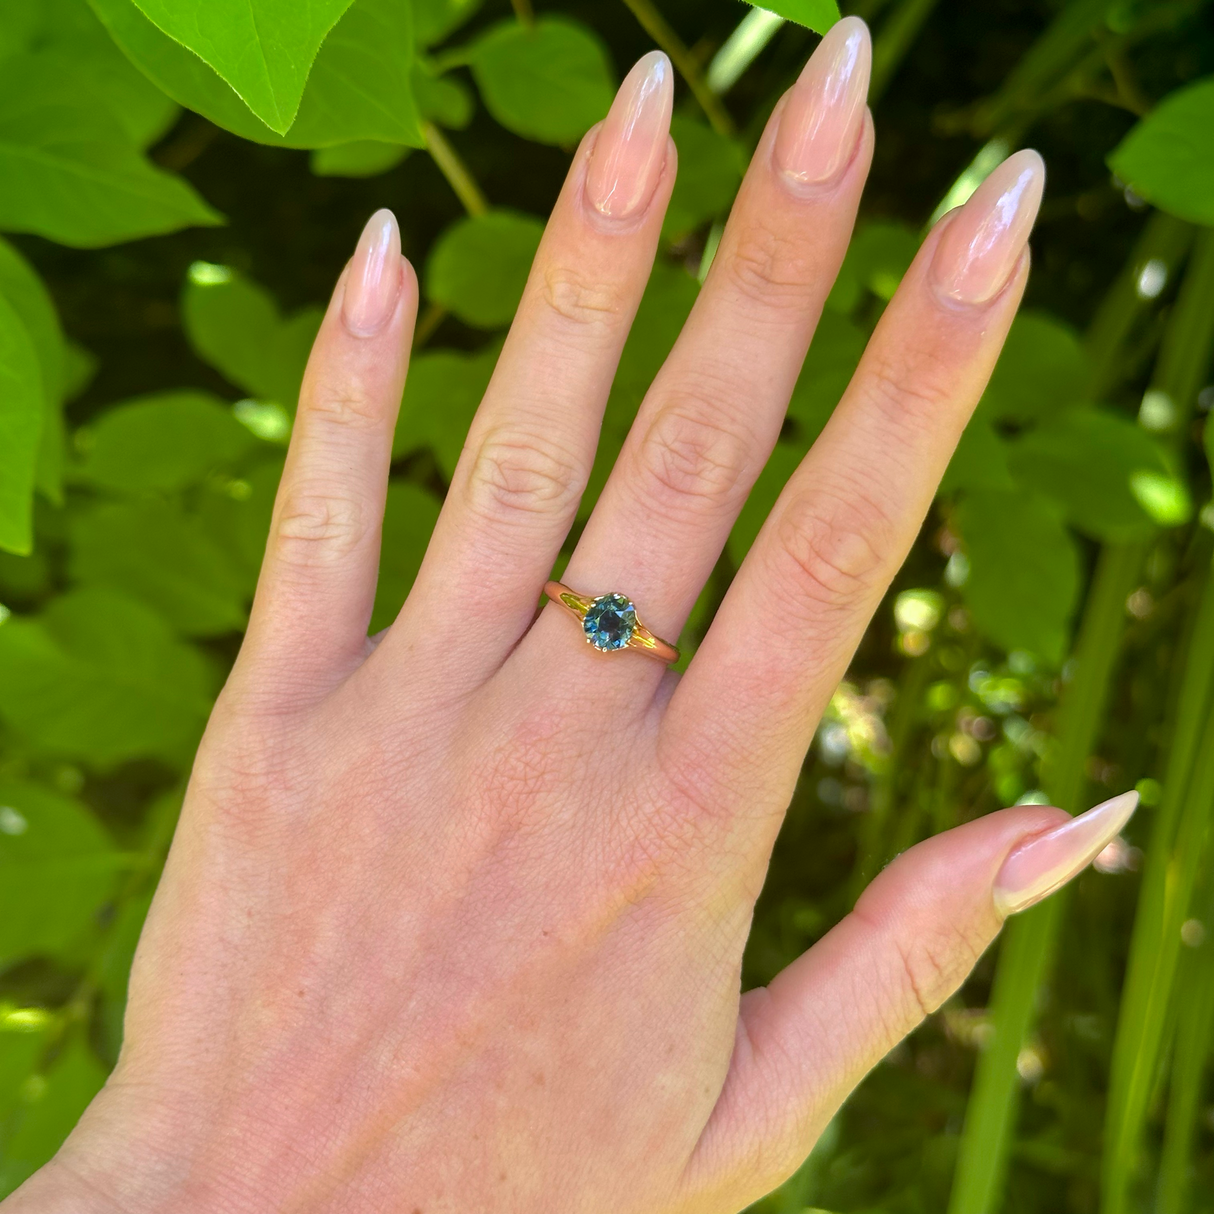 Antique, Edwardian Single-Stone Old Cut Teal Sapphire Ring, 18ct Rosy Yellow Gold worn on hand.